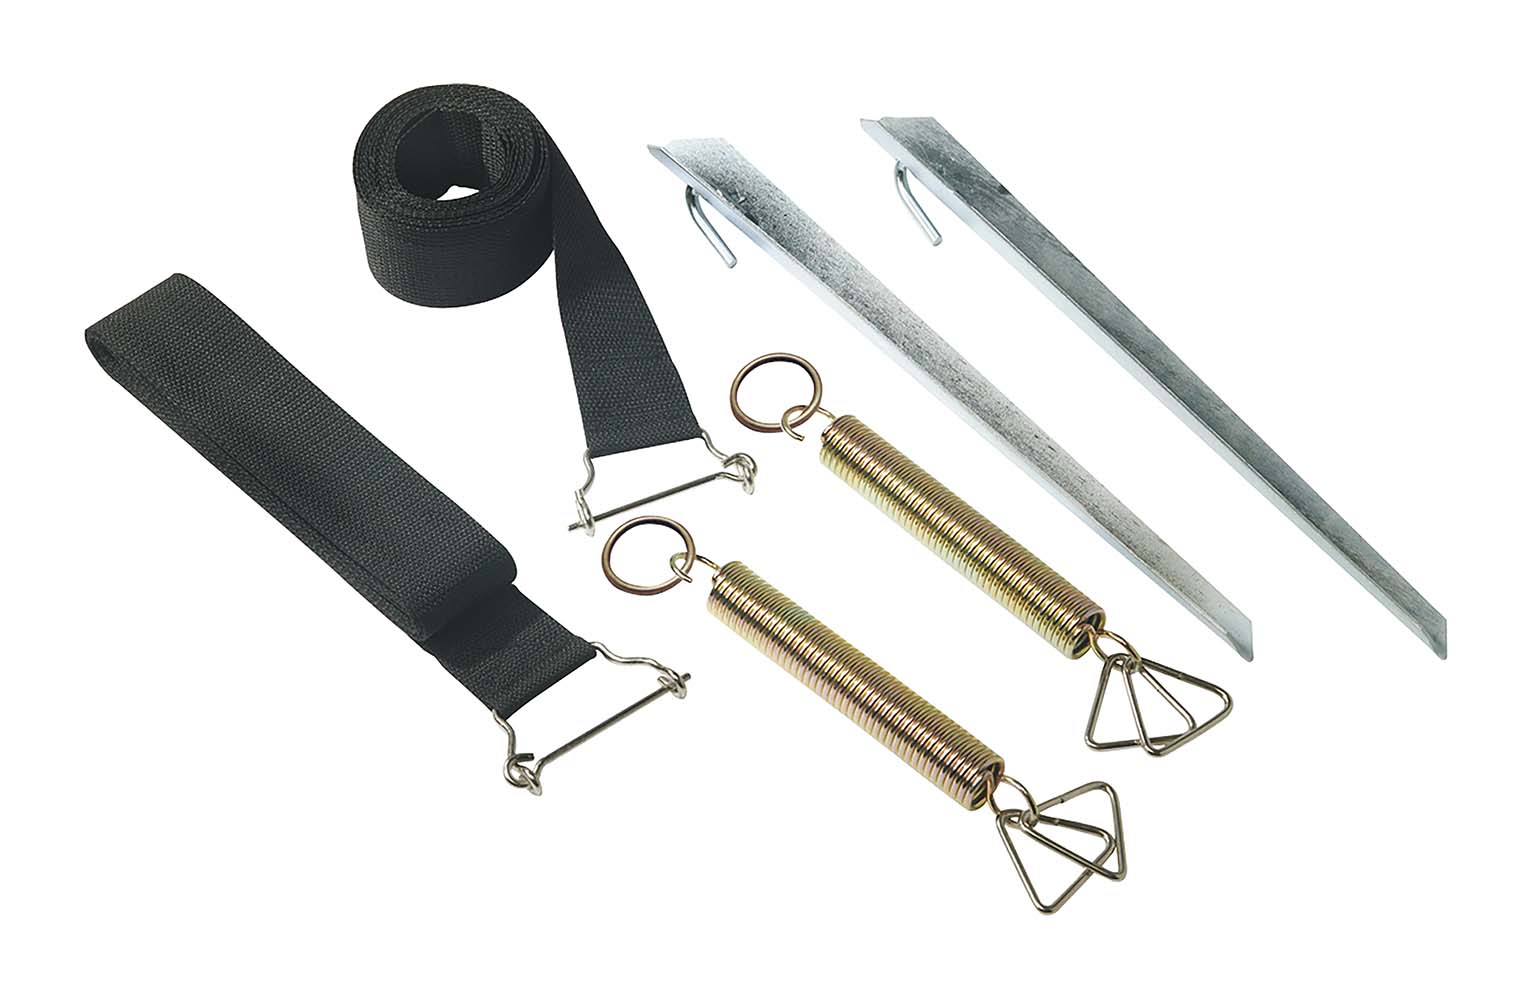 Bo-Camp - Tie-down kit - Universal - Clips - 2 Pieces of 3.5 meters